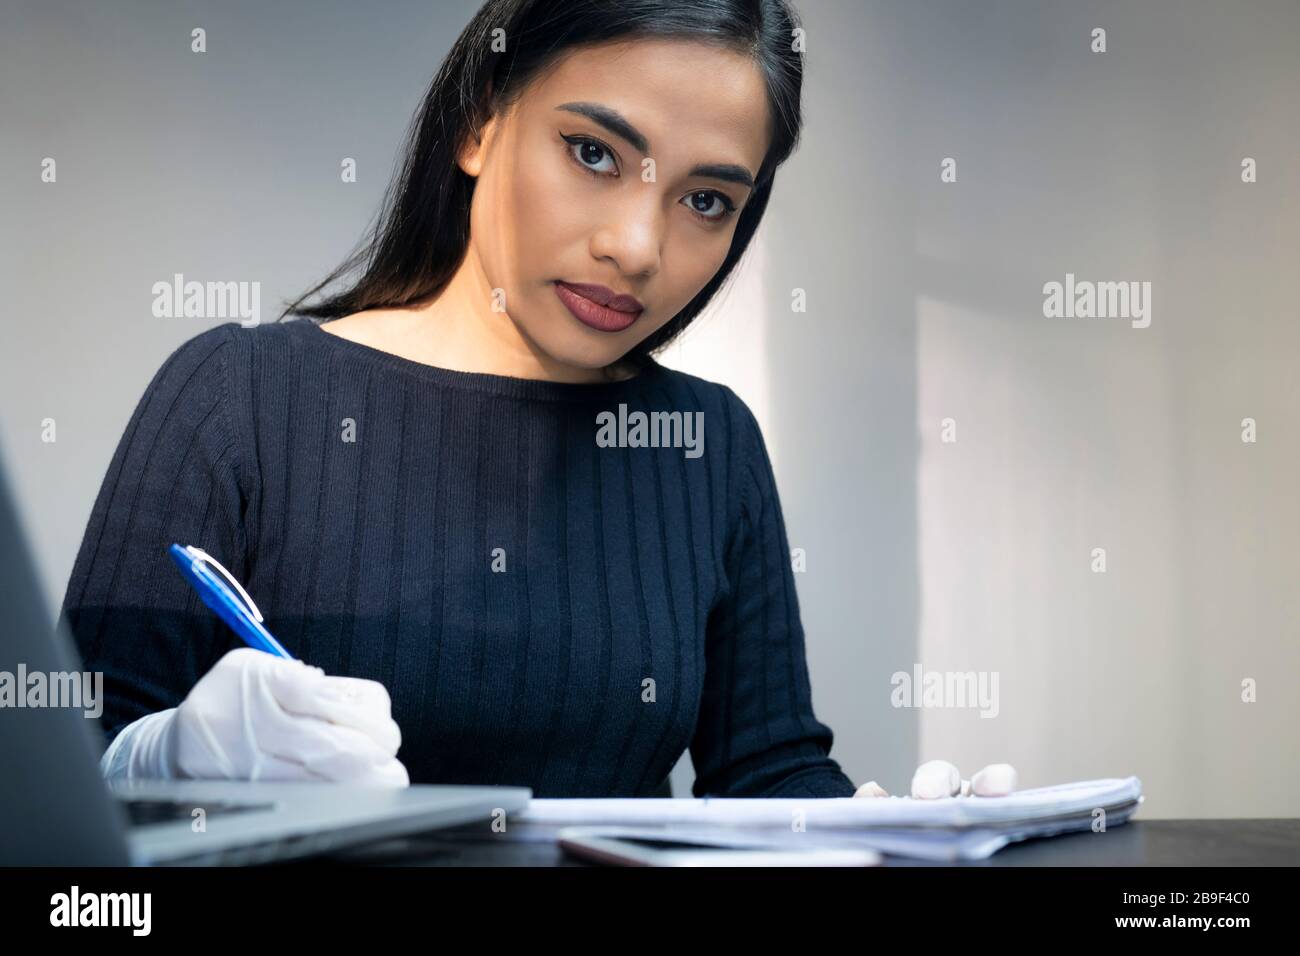 Coronavirus outbreak. Beautiful asian woman working at home during the lockdown. Wearing disposable medical gloves. Stock Photo